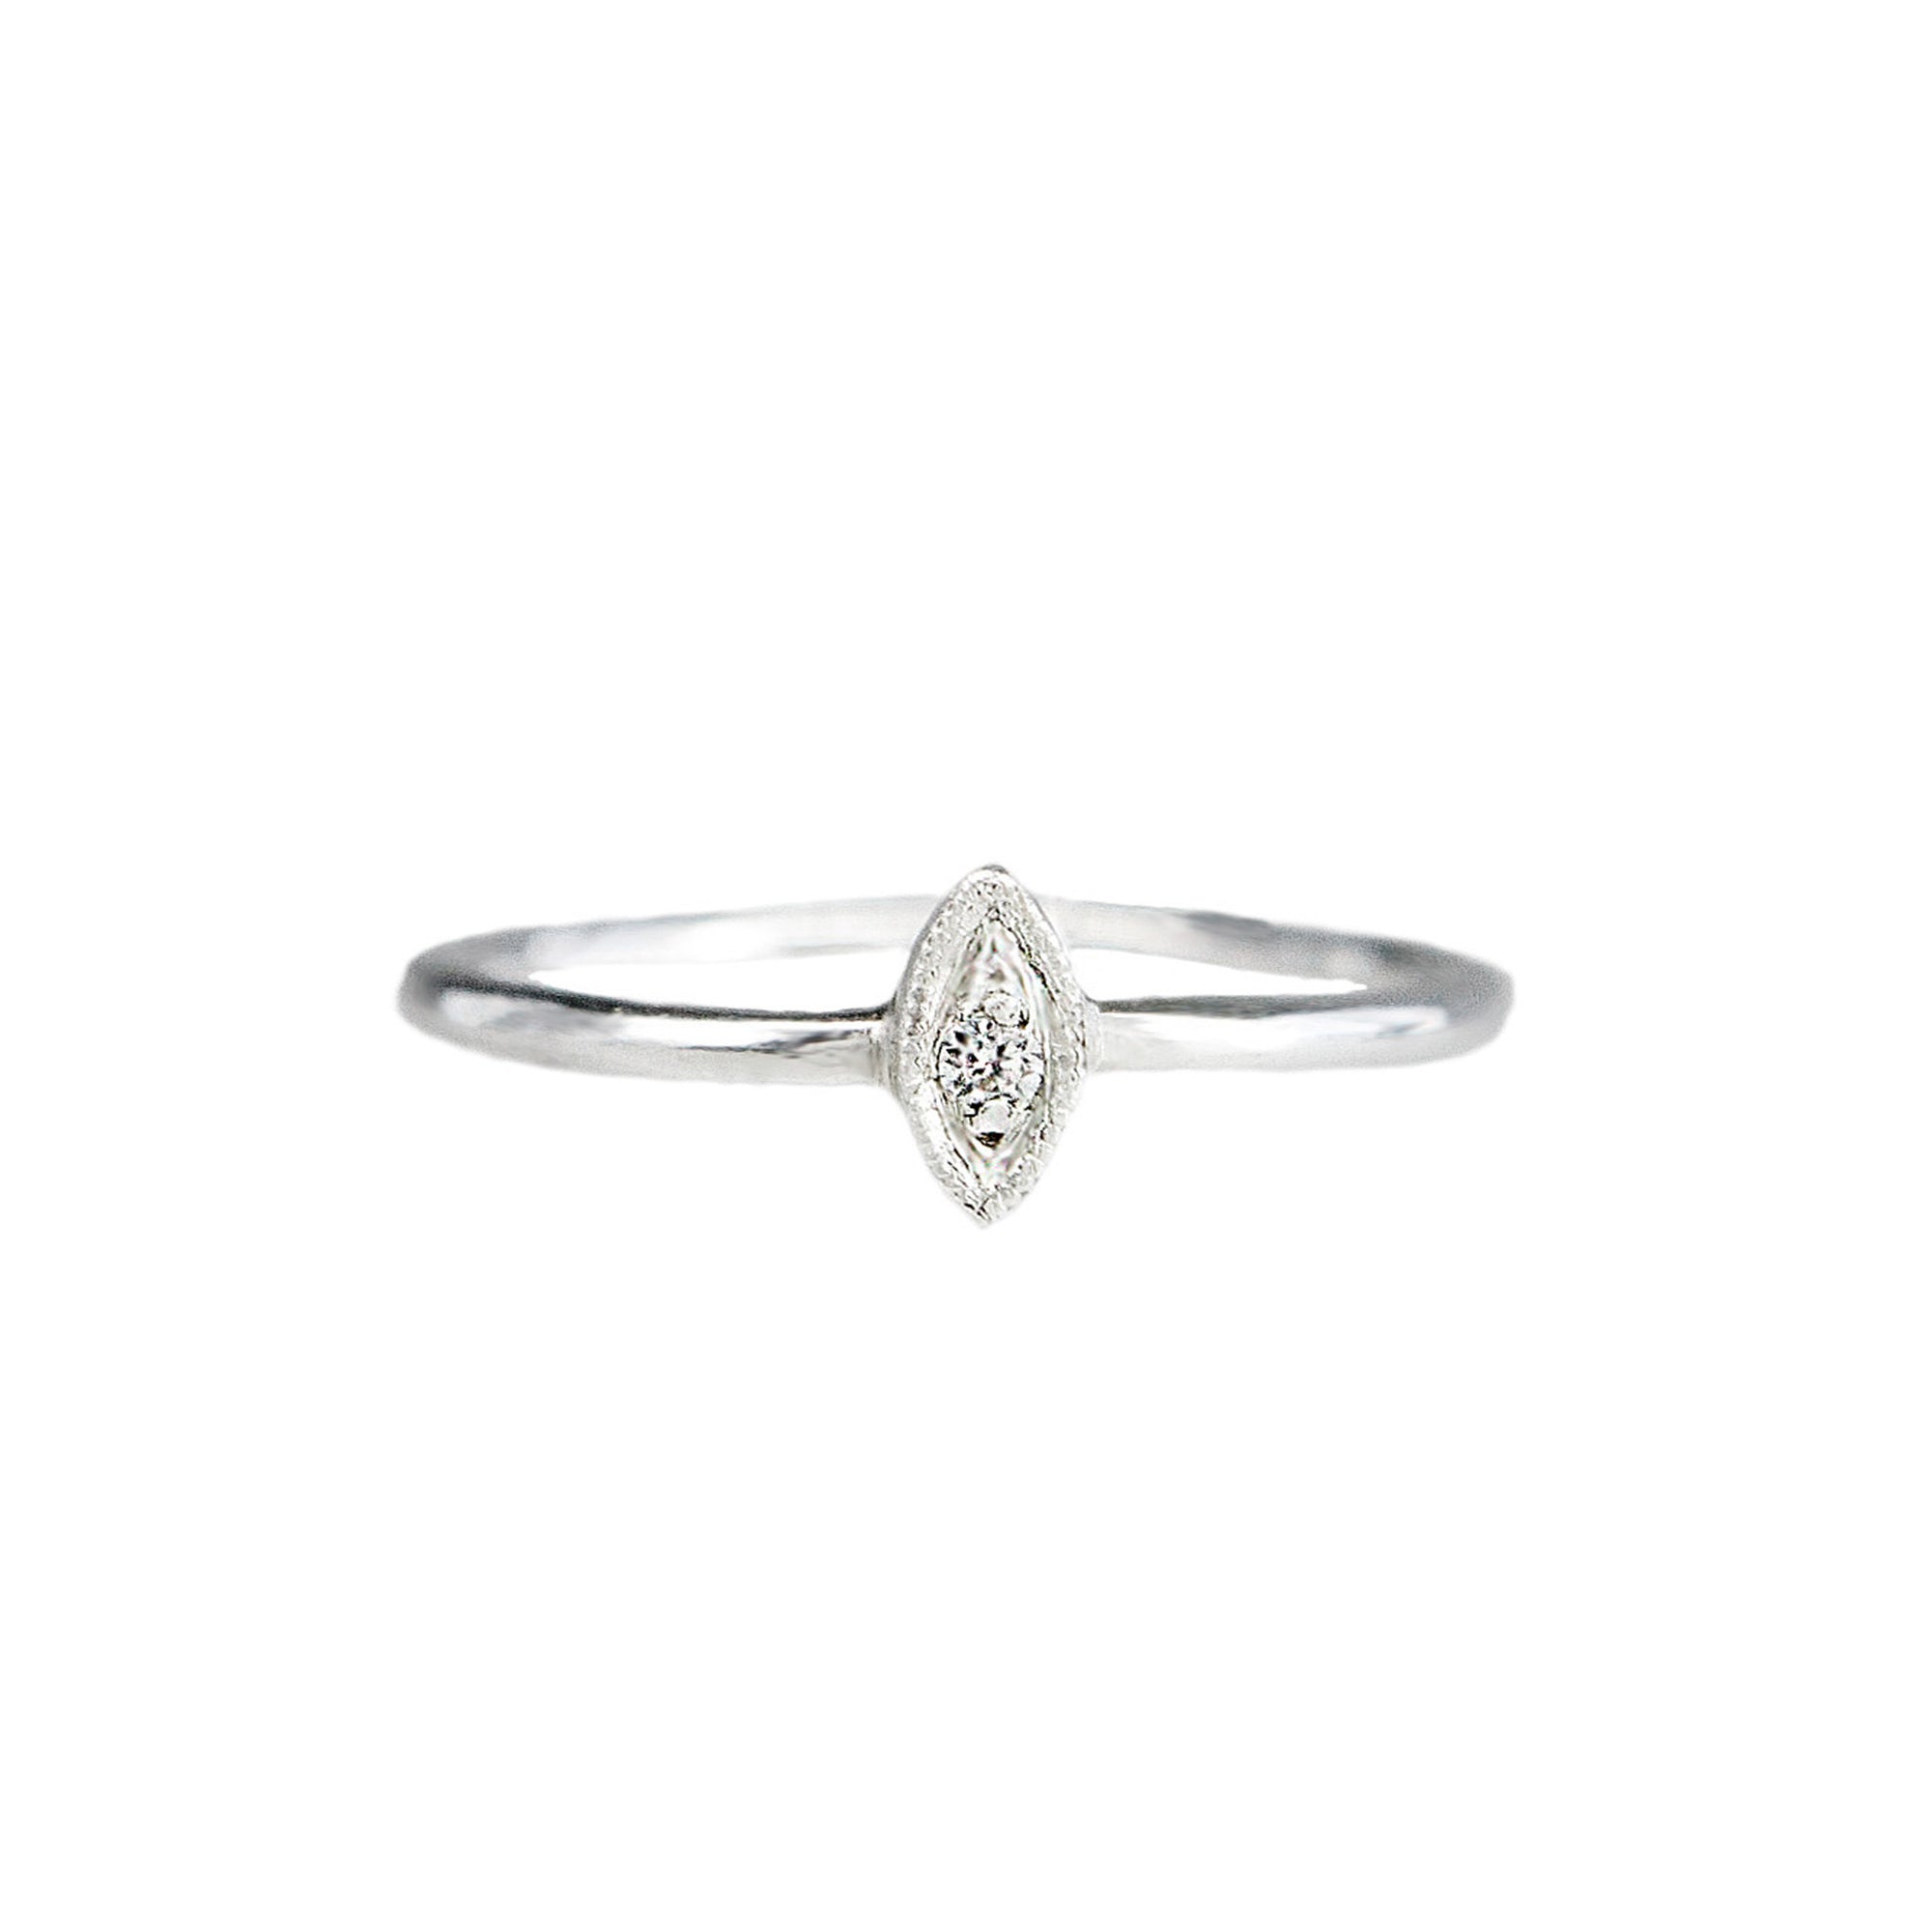 No.8 Ethical Proposal Ring